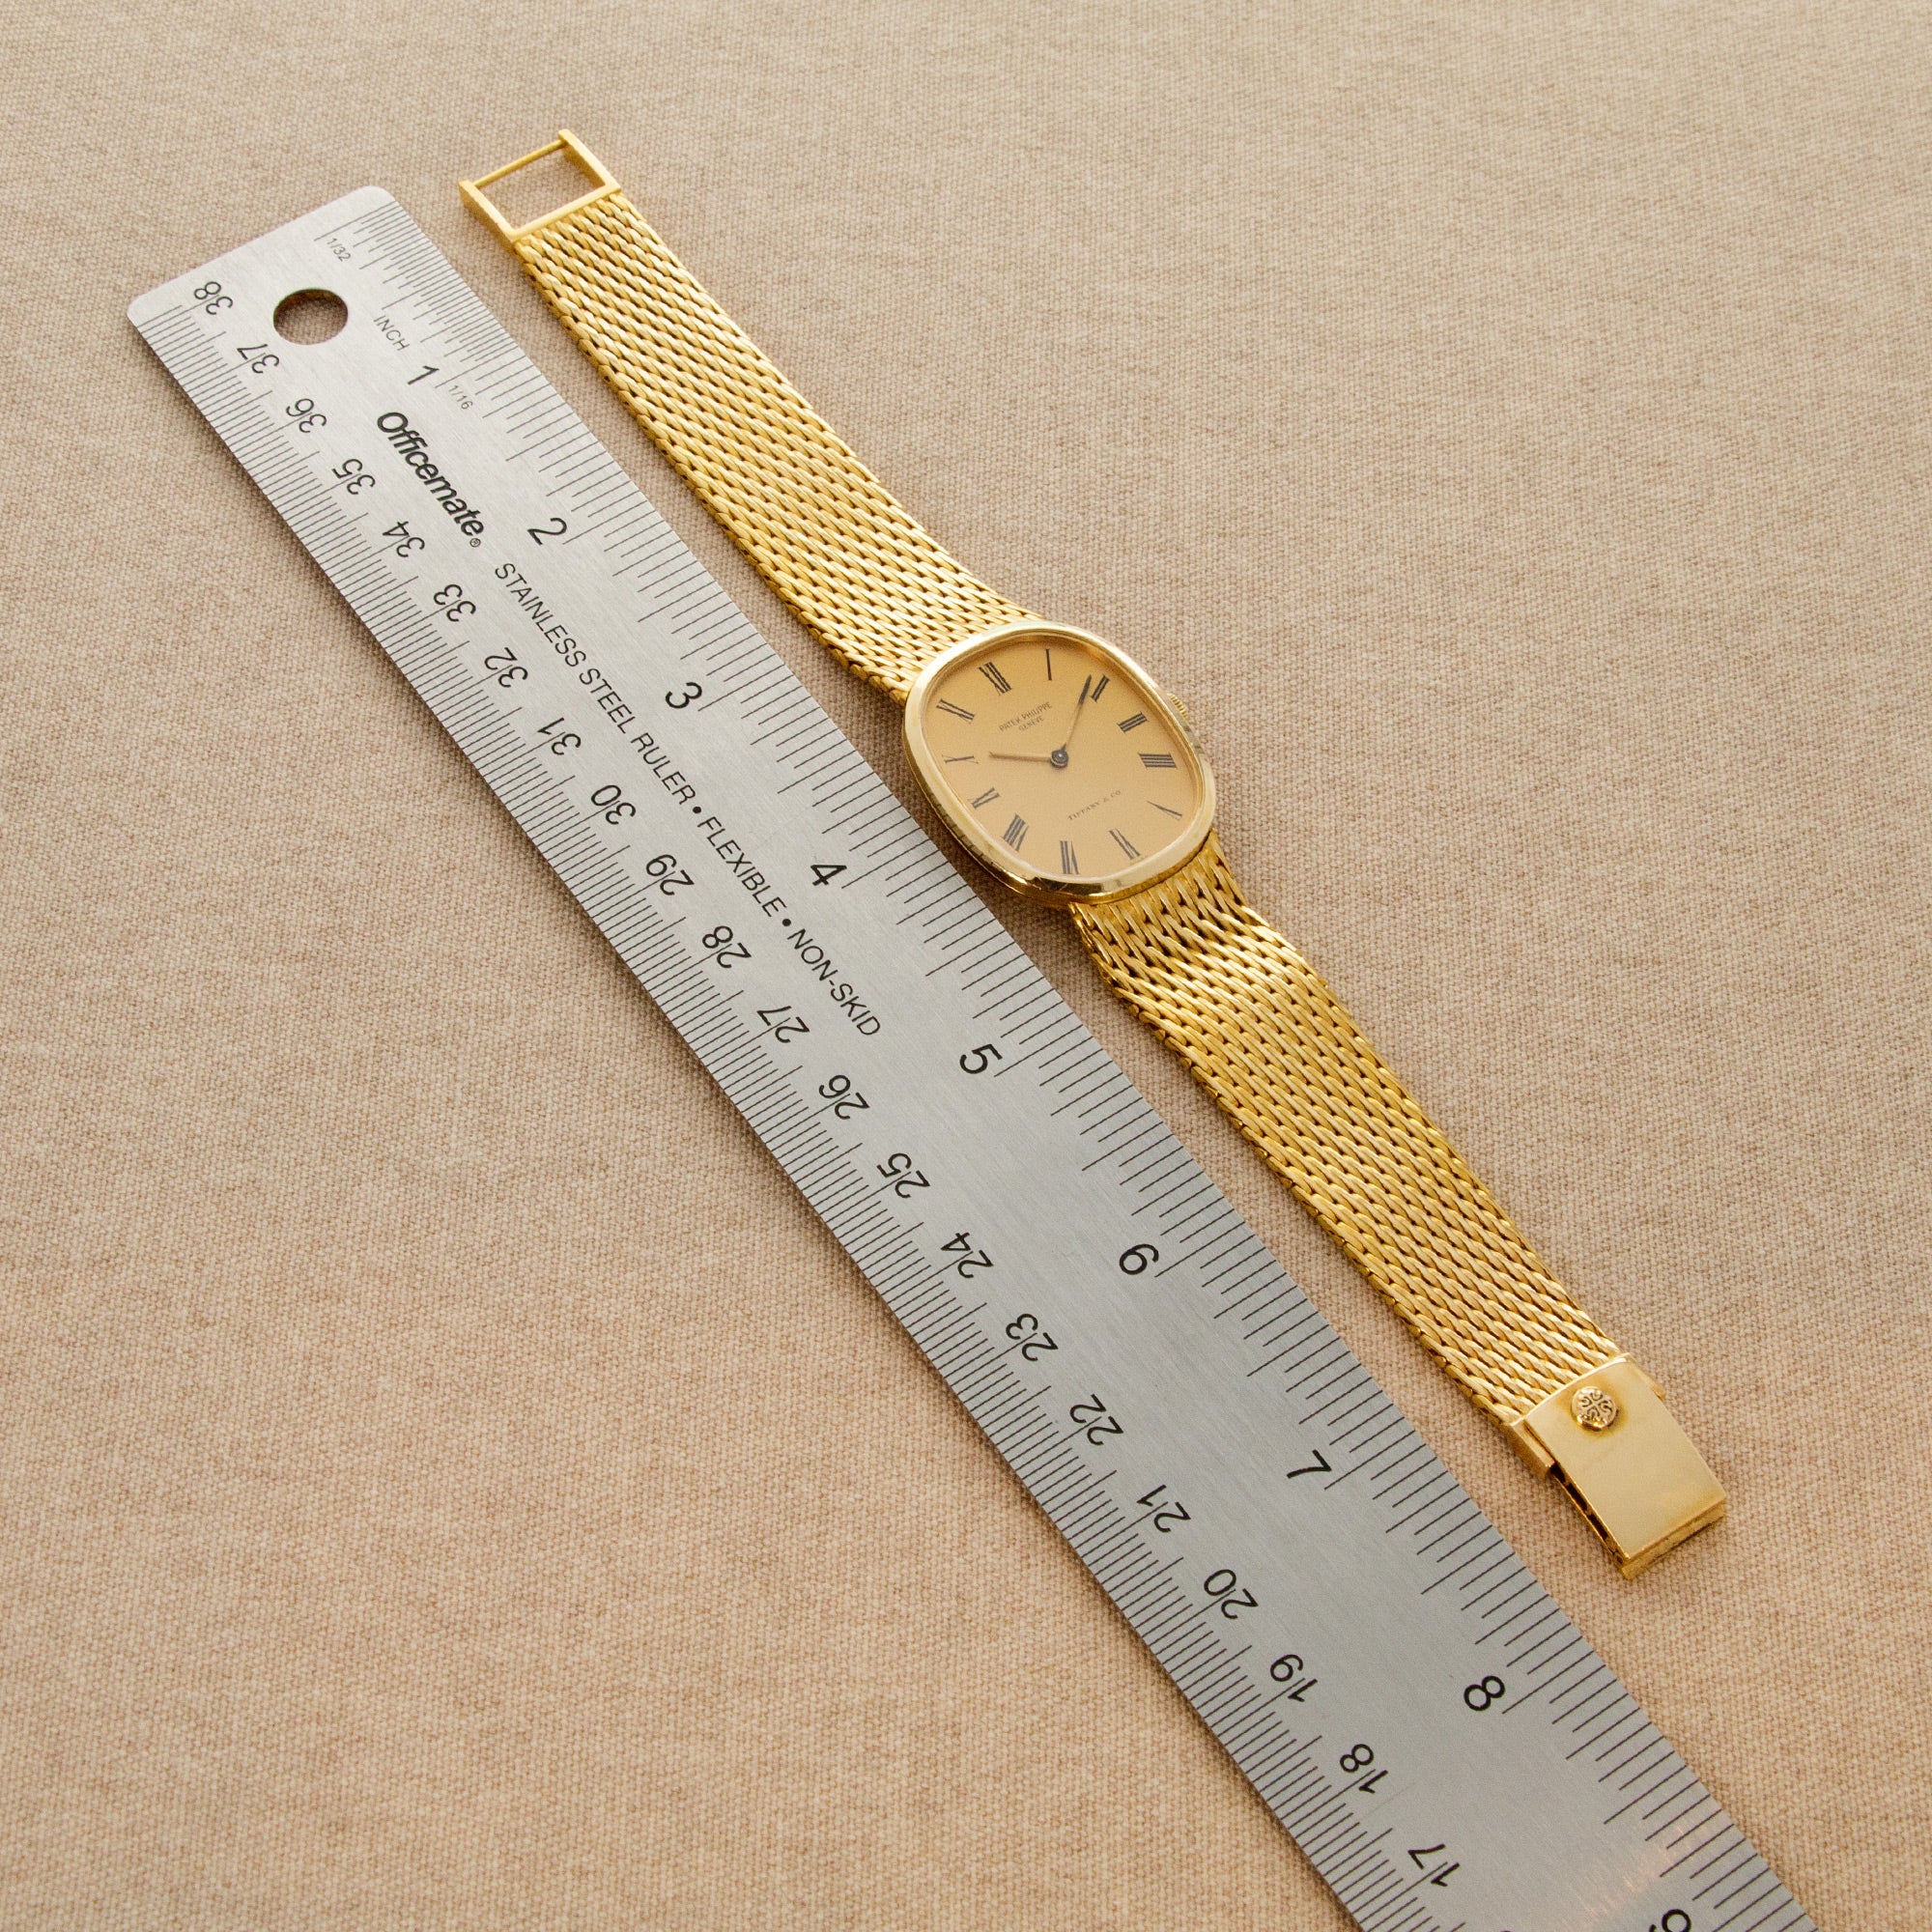 Patek Philippe - Patek Philippe Yellow Gold Ellipse Ref. 3548 Retailed by Tiffany &amp; Co. - The Keystone Watches